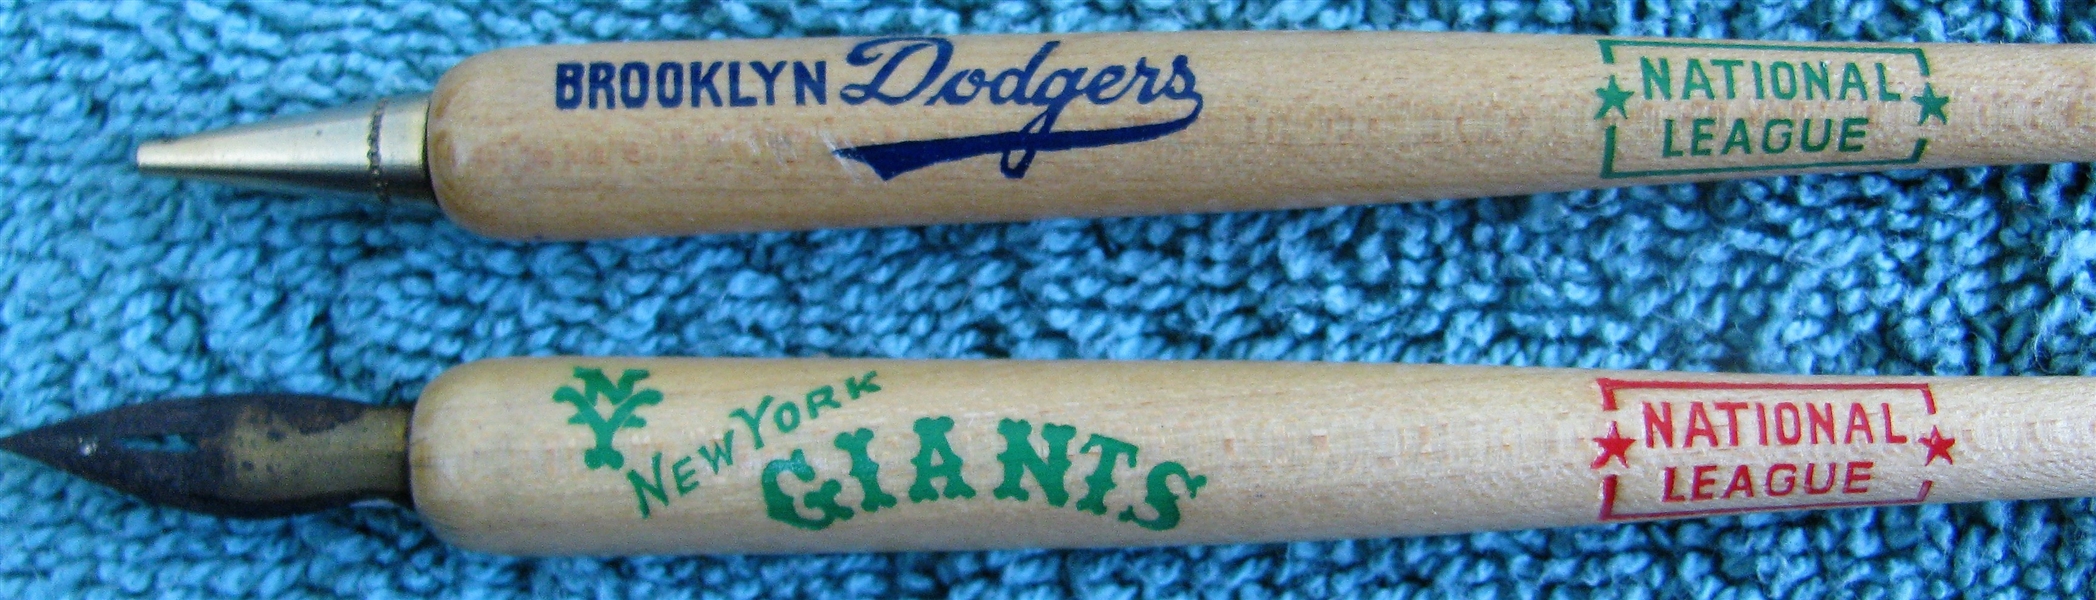 40's BROOKLYN DODGERS & NY GIANTS PEN AND PENCIL SET IN BOX